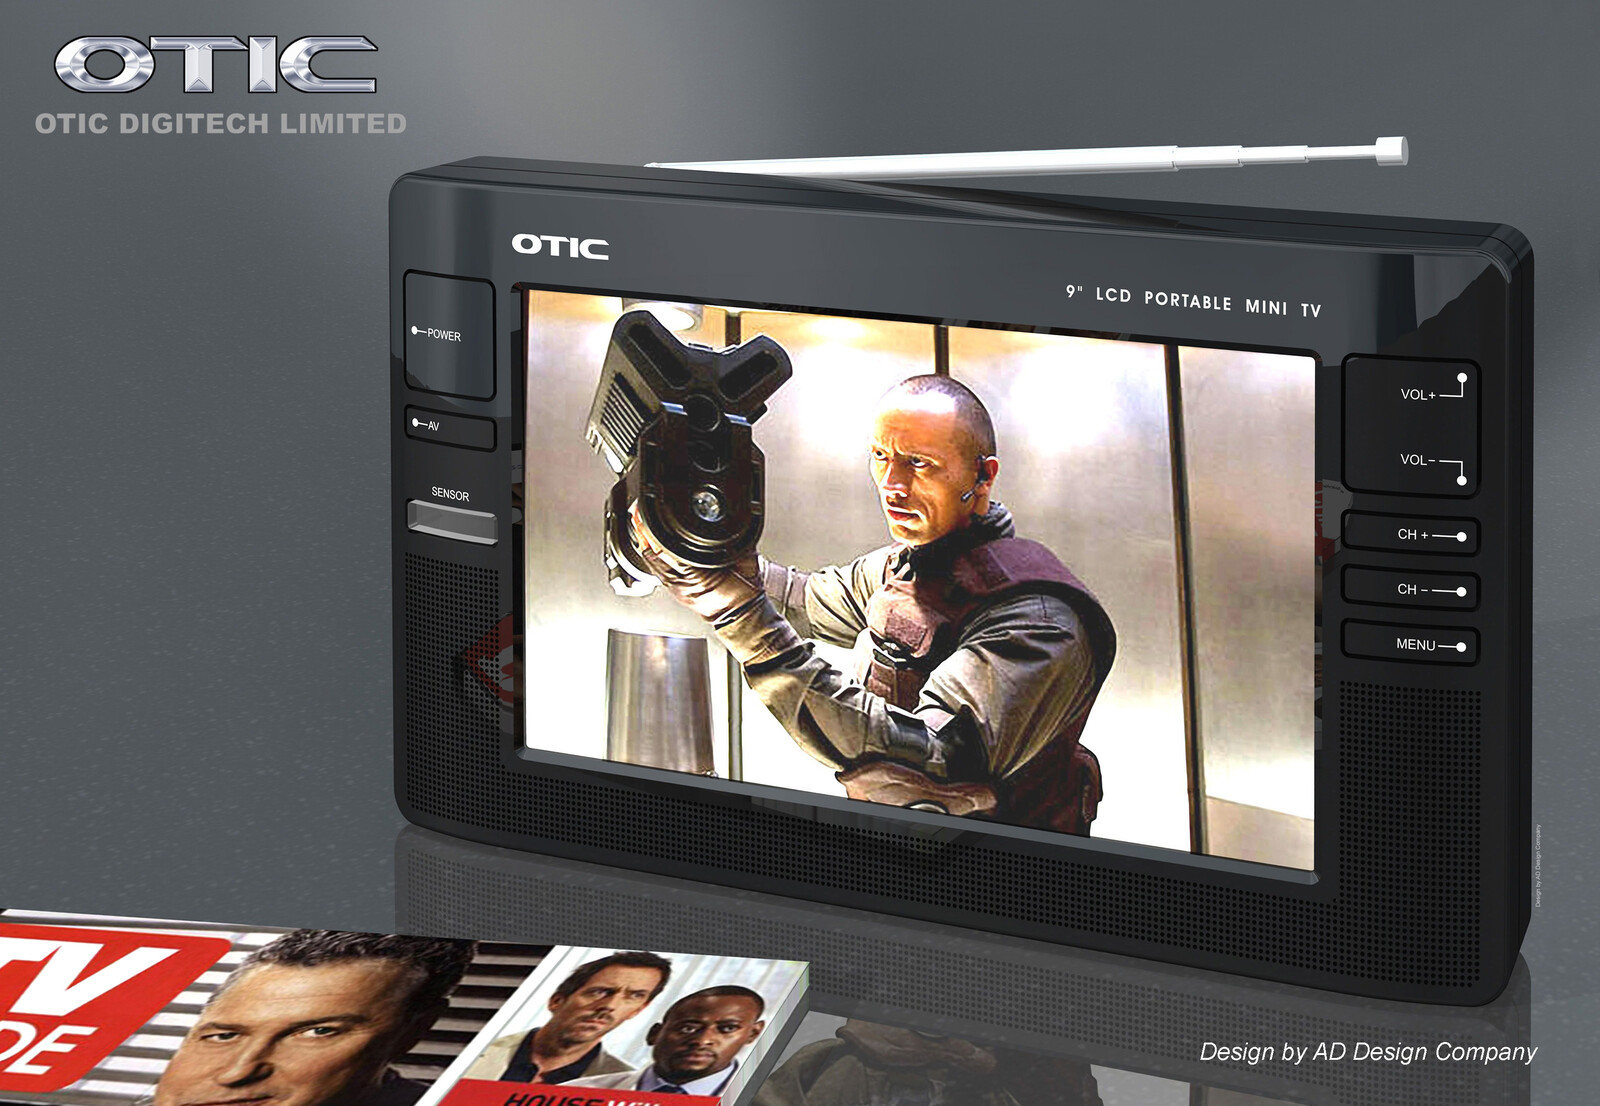 💎 Portable LED TV | Design by Leung Chung Kwan on 2009 💎
Brand Name︰OTIC | Client︰OTIC Limited